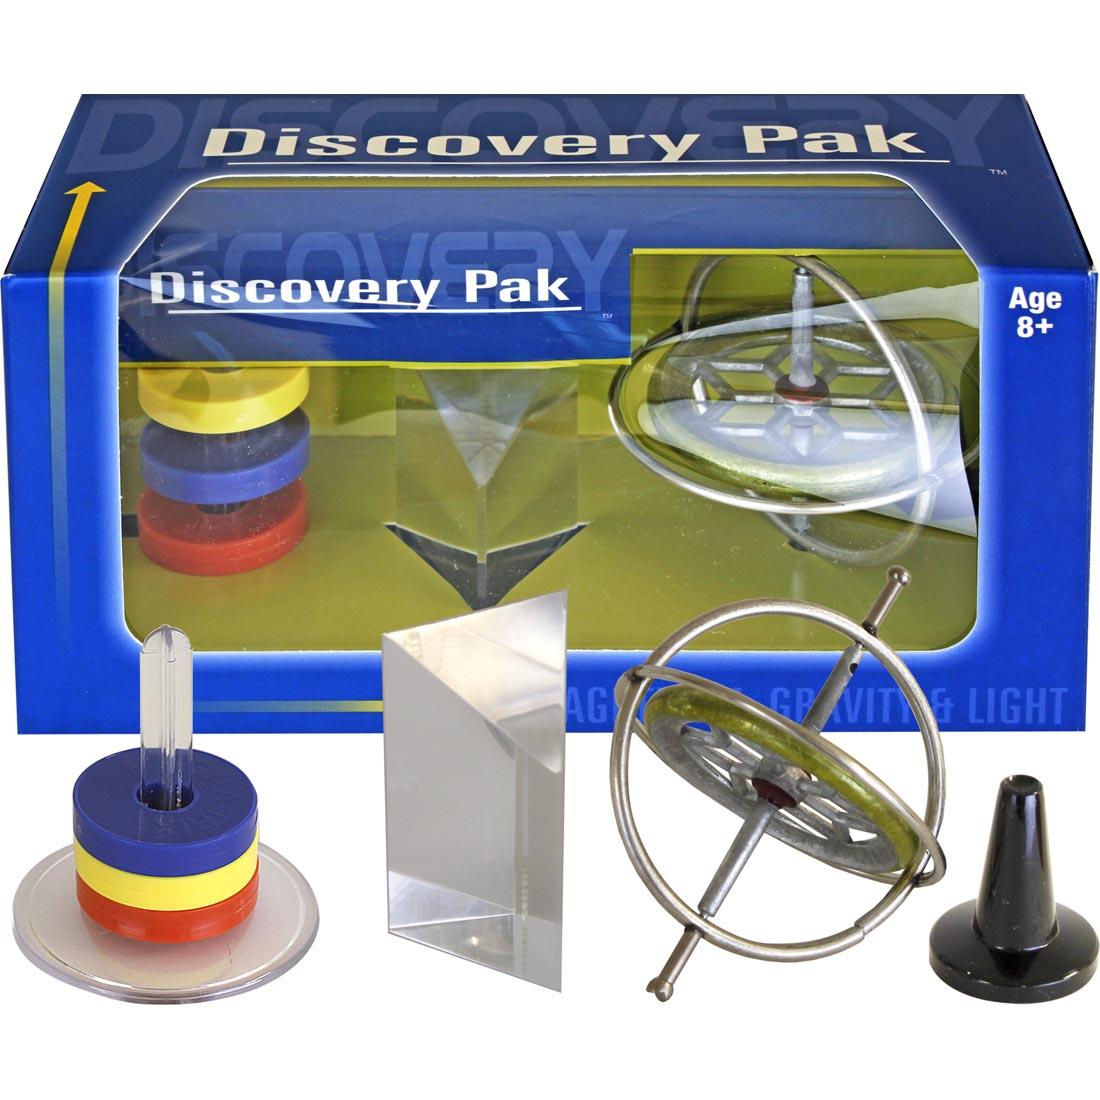 Tedco Science Discovery Pack with components shown both inside and outside the package